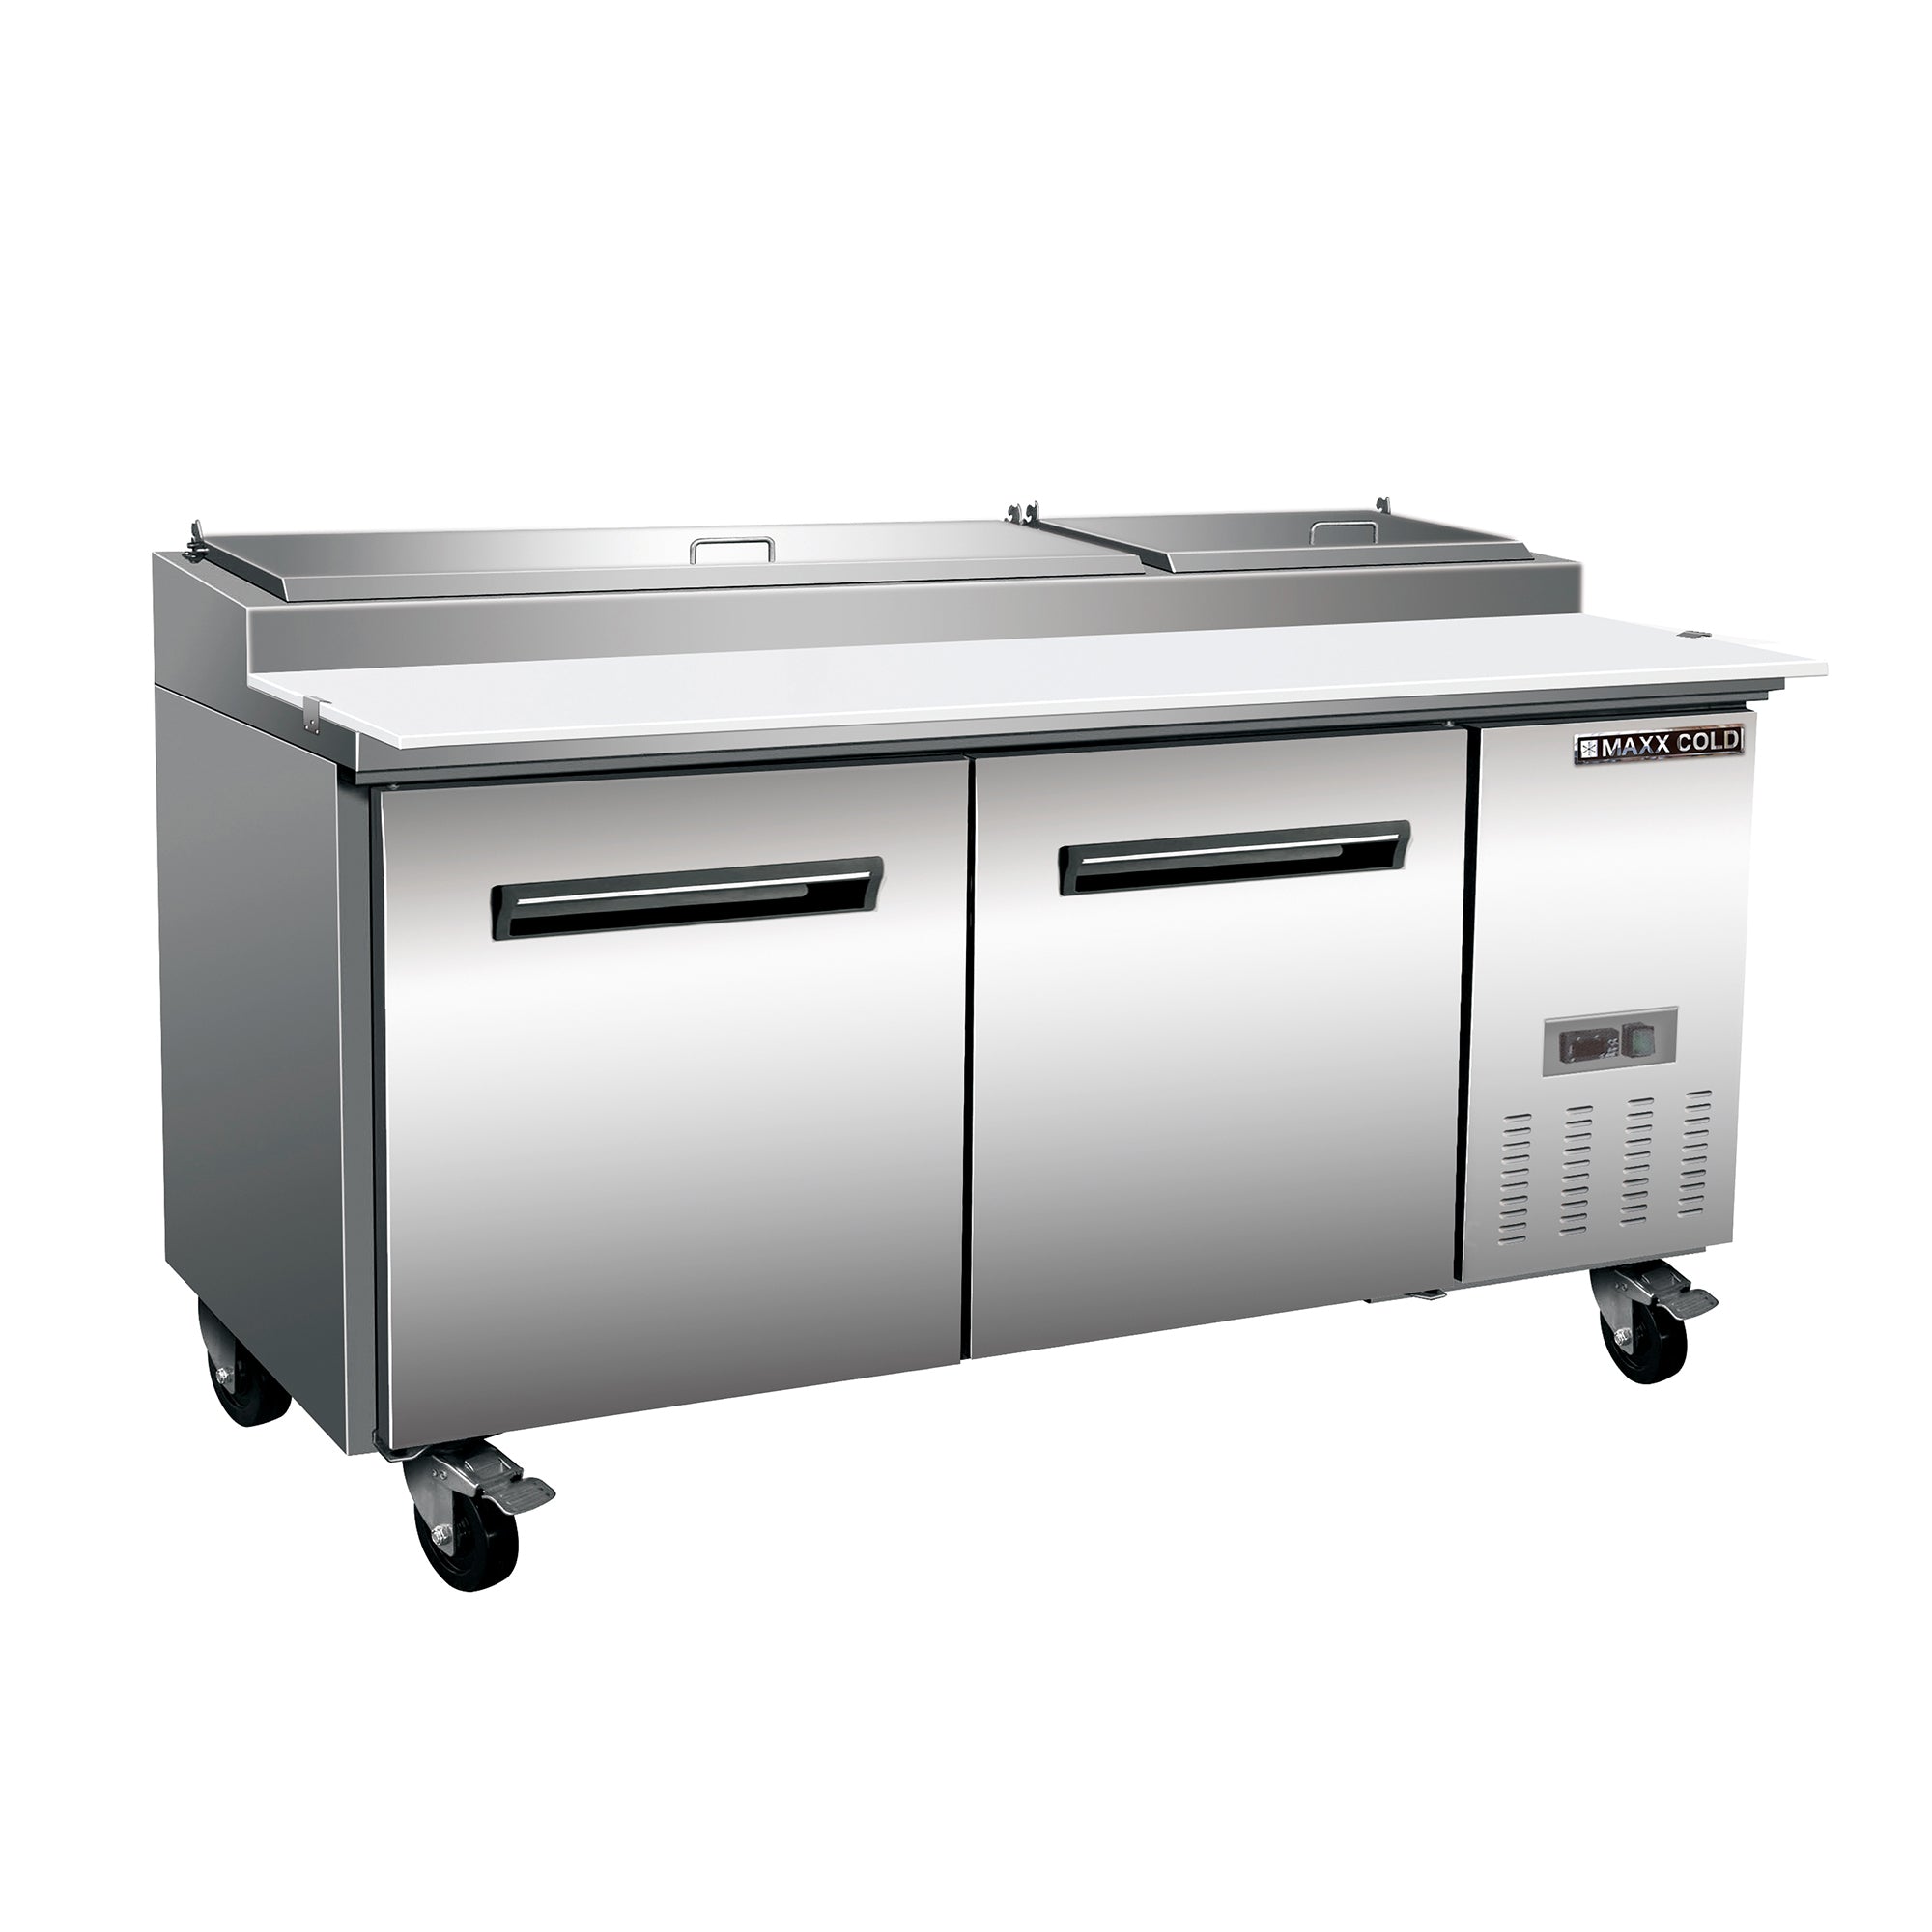 Maxx Cold - MXCPP70HC, Maxx Cold Two-Door Refrigerated Pizza Prep Table, 70.8”W, 22 cu. ft. Storage Capacity, Equipped with (9) 4” Deep Pans and Cutting Board, in Stainless Steel